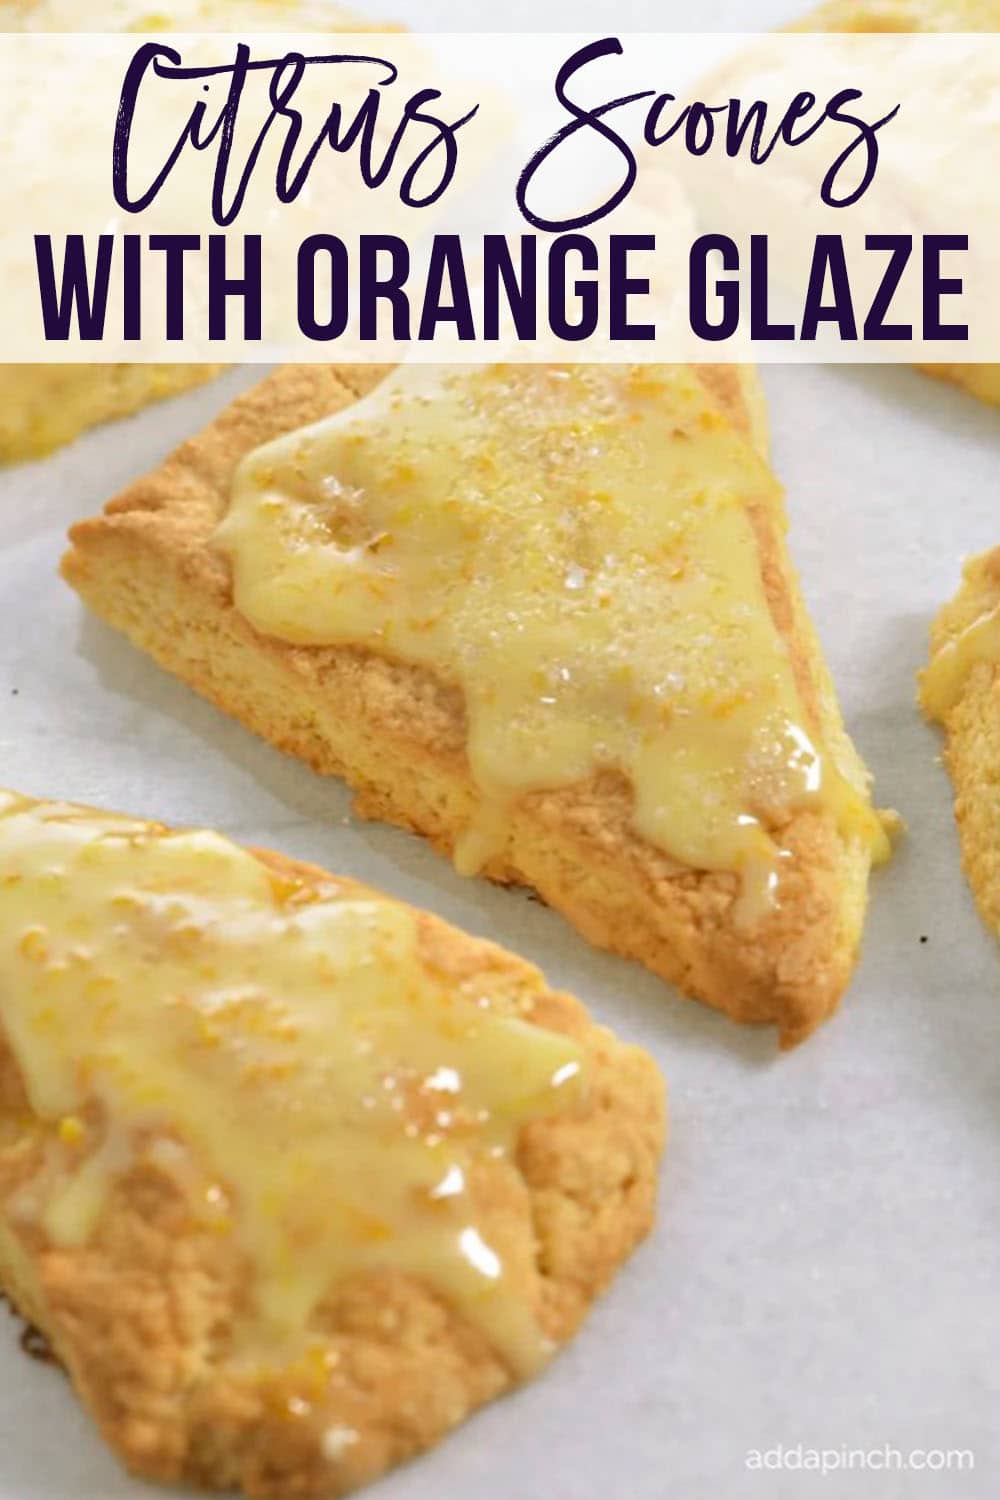 Baking pan covered in parchment with scones covered in orange glaze -with text - addapinch.com